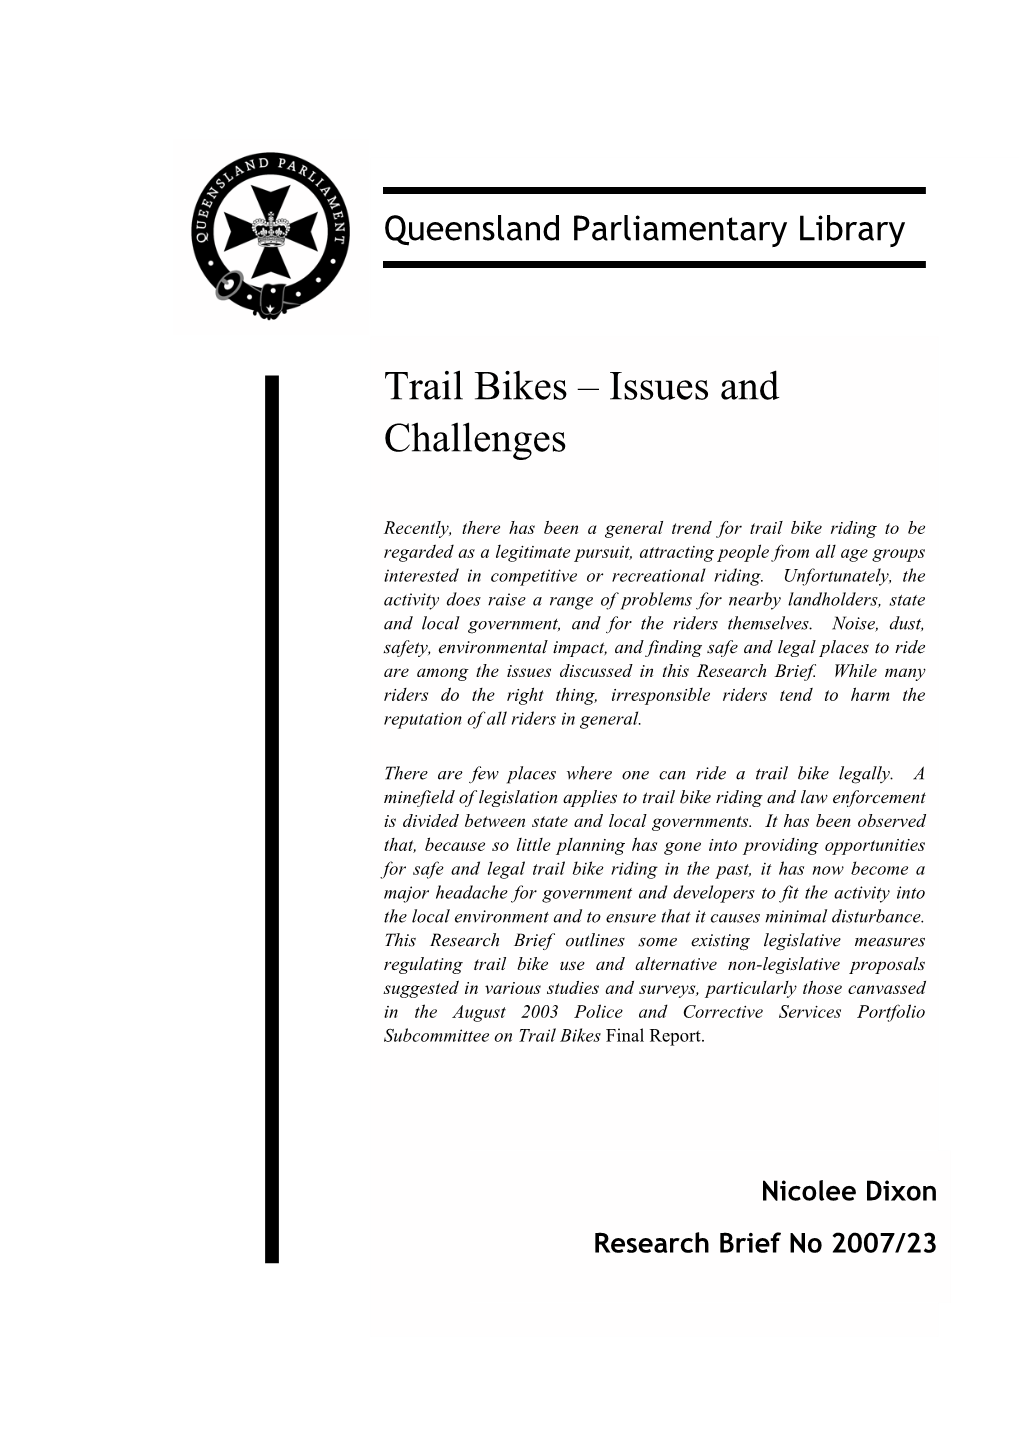 Trail Bikes – Issues and Challenges